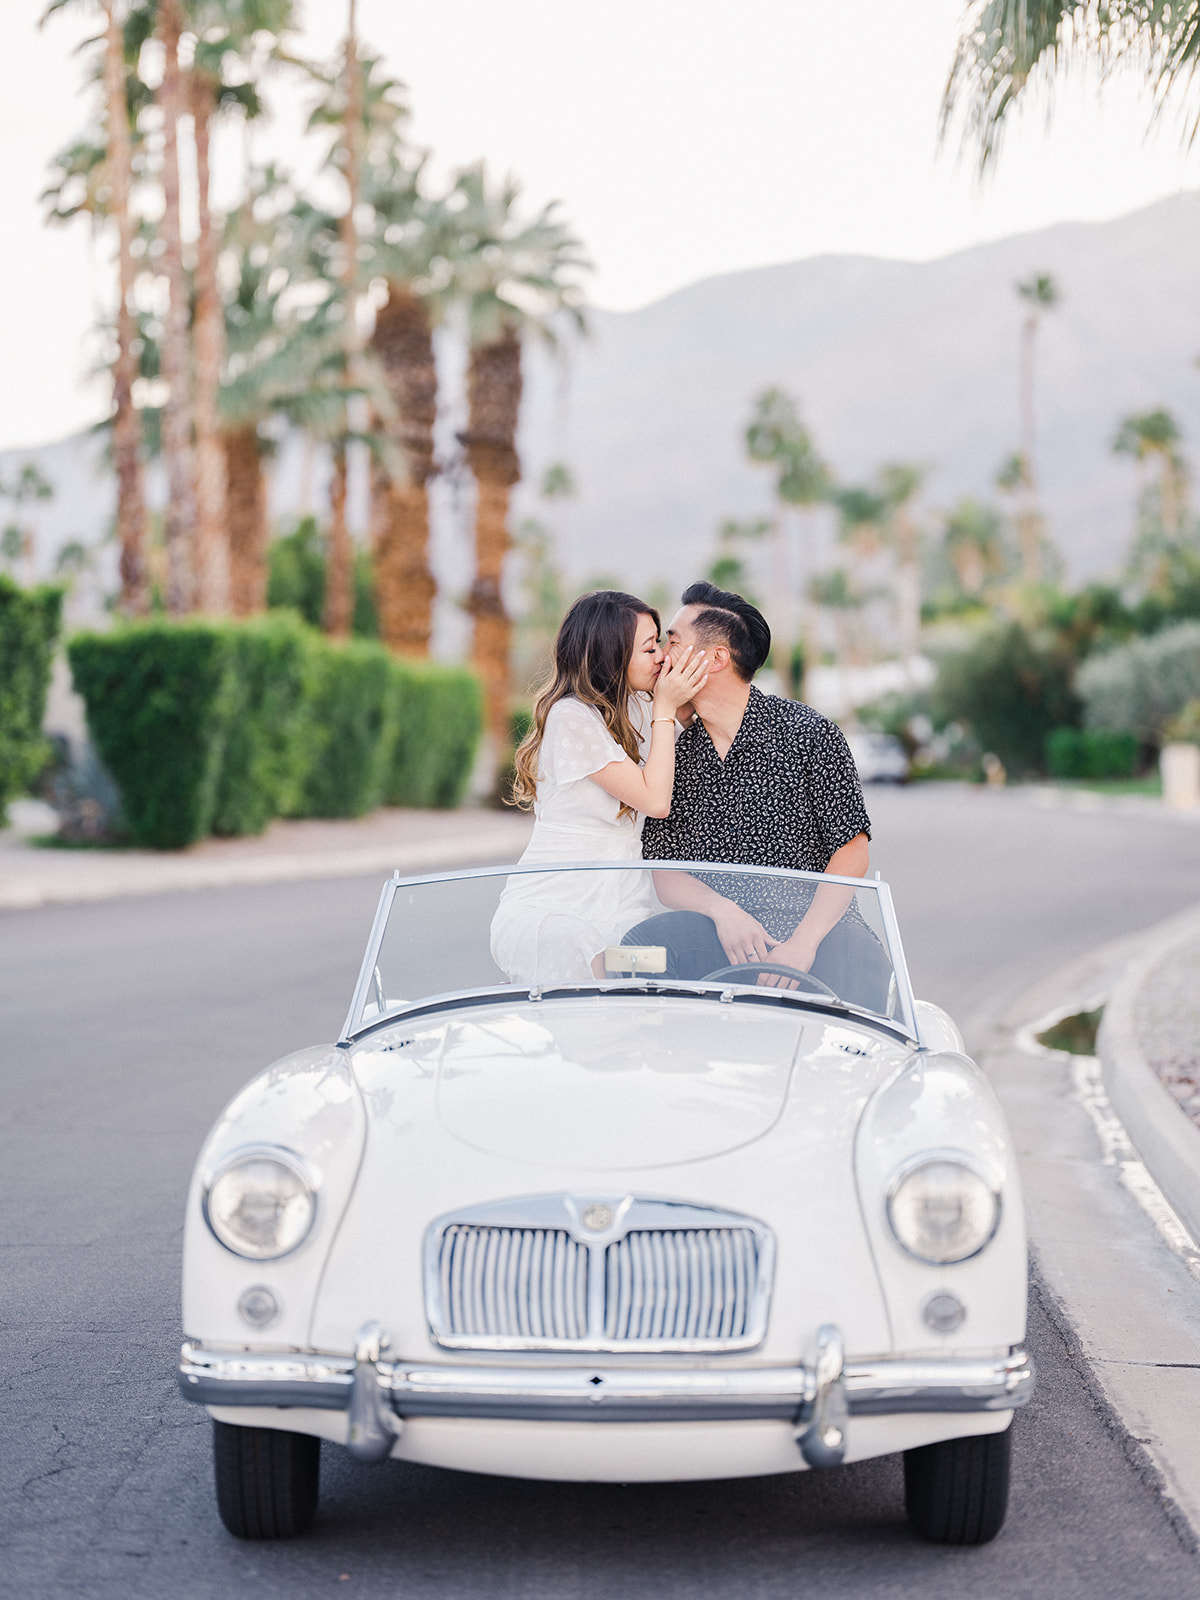 How To Propose In Los Angeles - Palm Springs